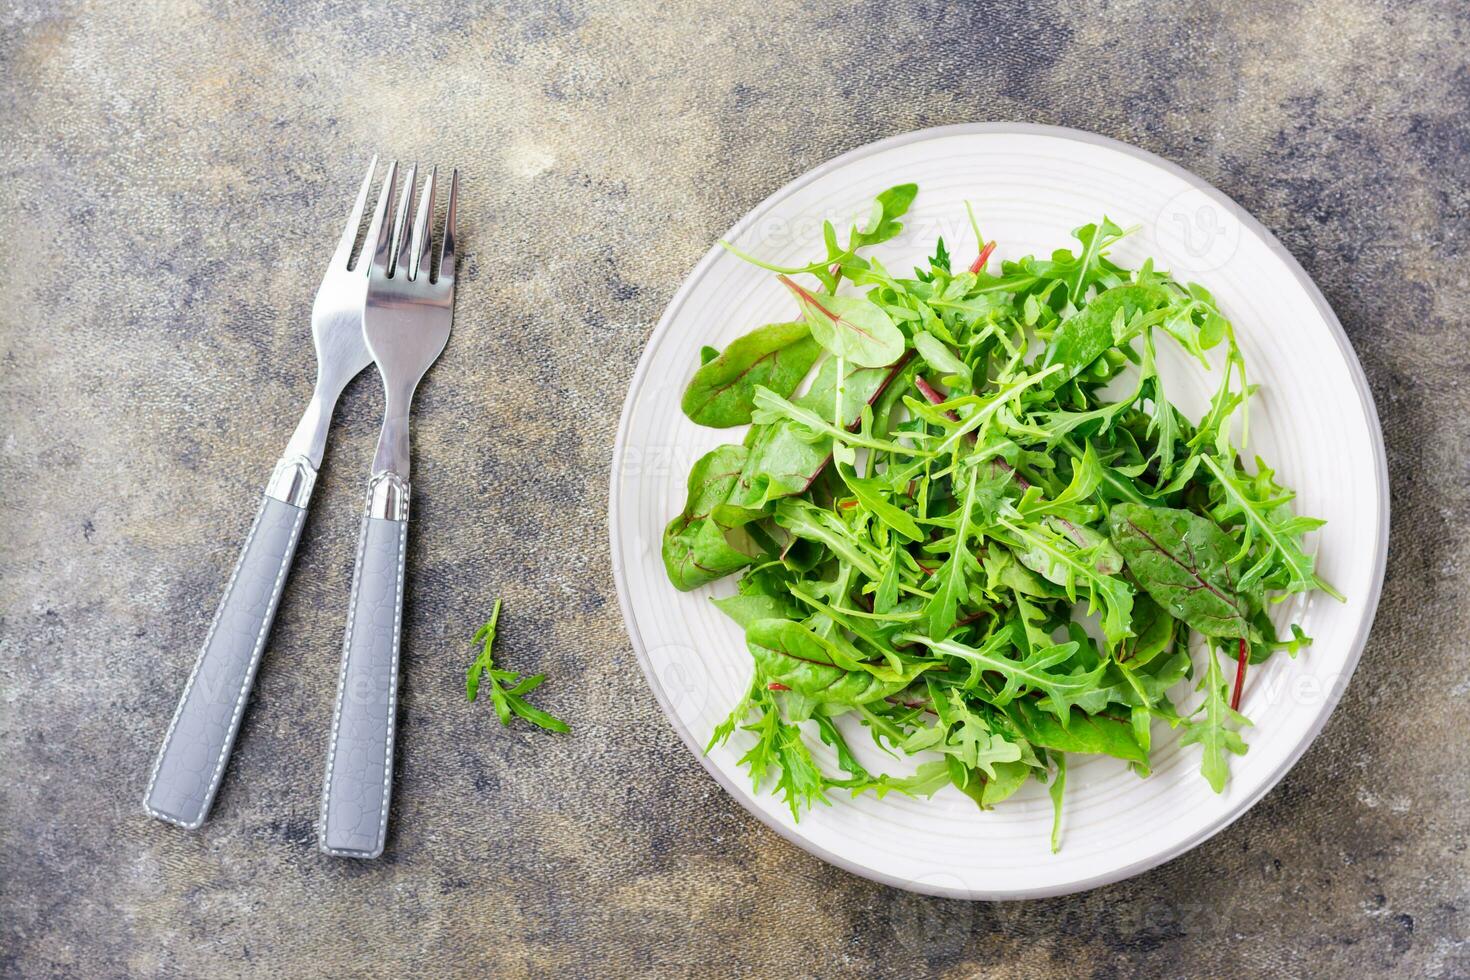 A mixture of fresh arugula, chard and mizun leaves on a plate and forks on the table. Vegetarianism, healthy eating. Top view photo